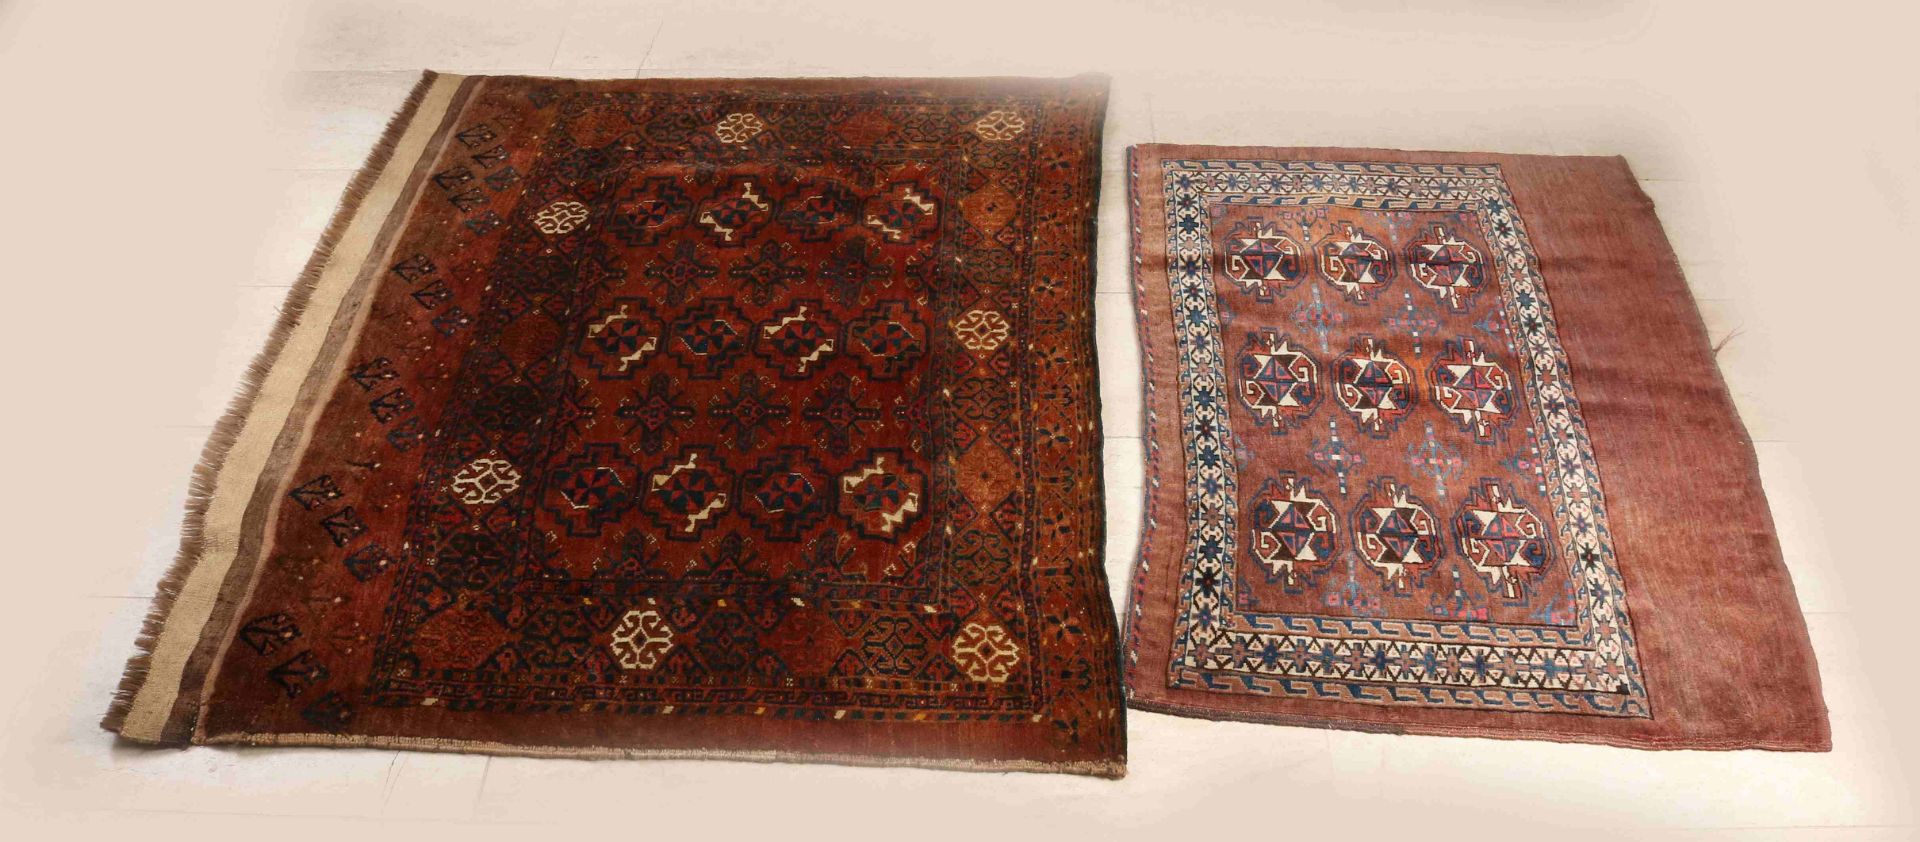 2x Old/antique Persian rug